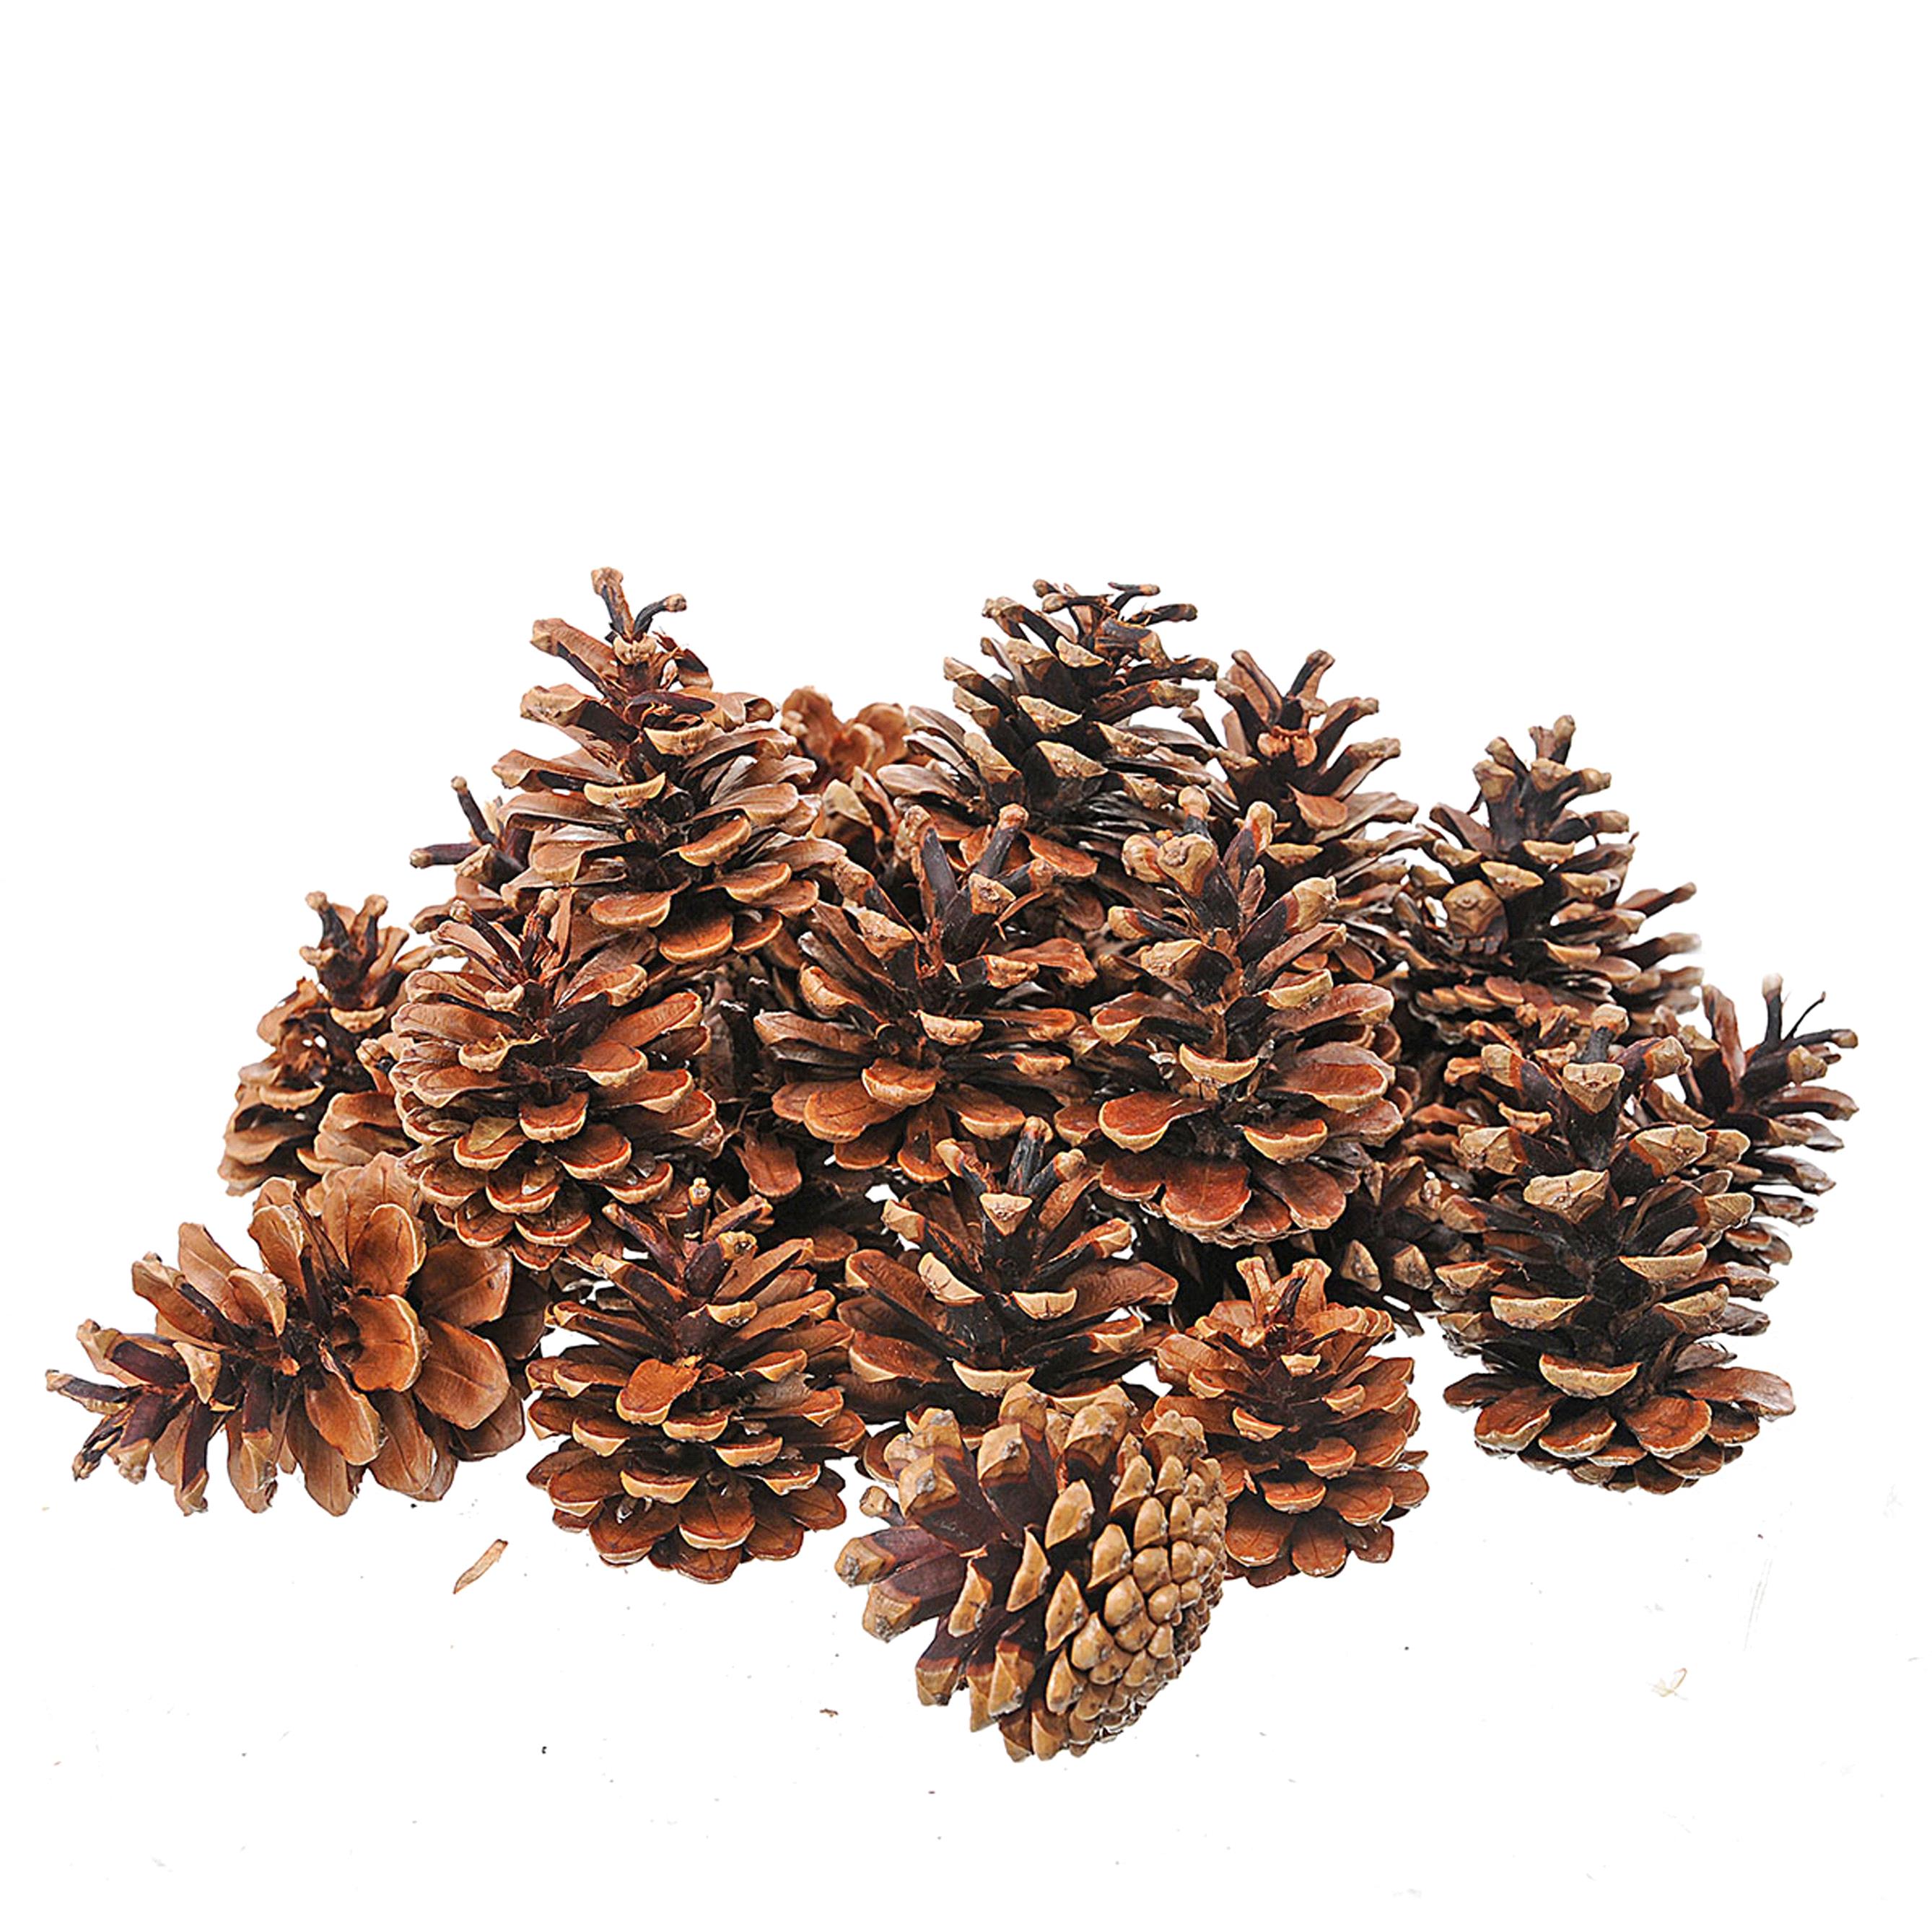 NATURAL PRODUCTS DRIED FLOWERS AND ERBS, CONES, FRUITS n coco's loose, PINE AUSTR/NIGRA A KG SACCO